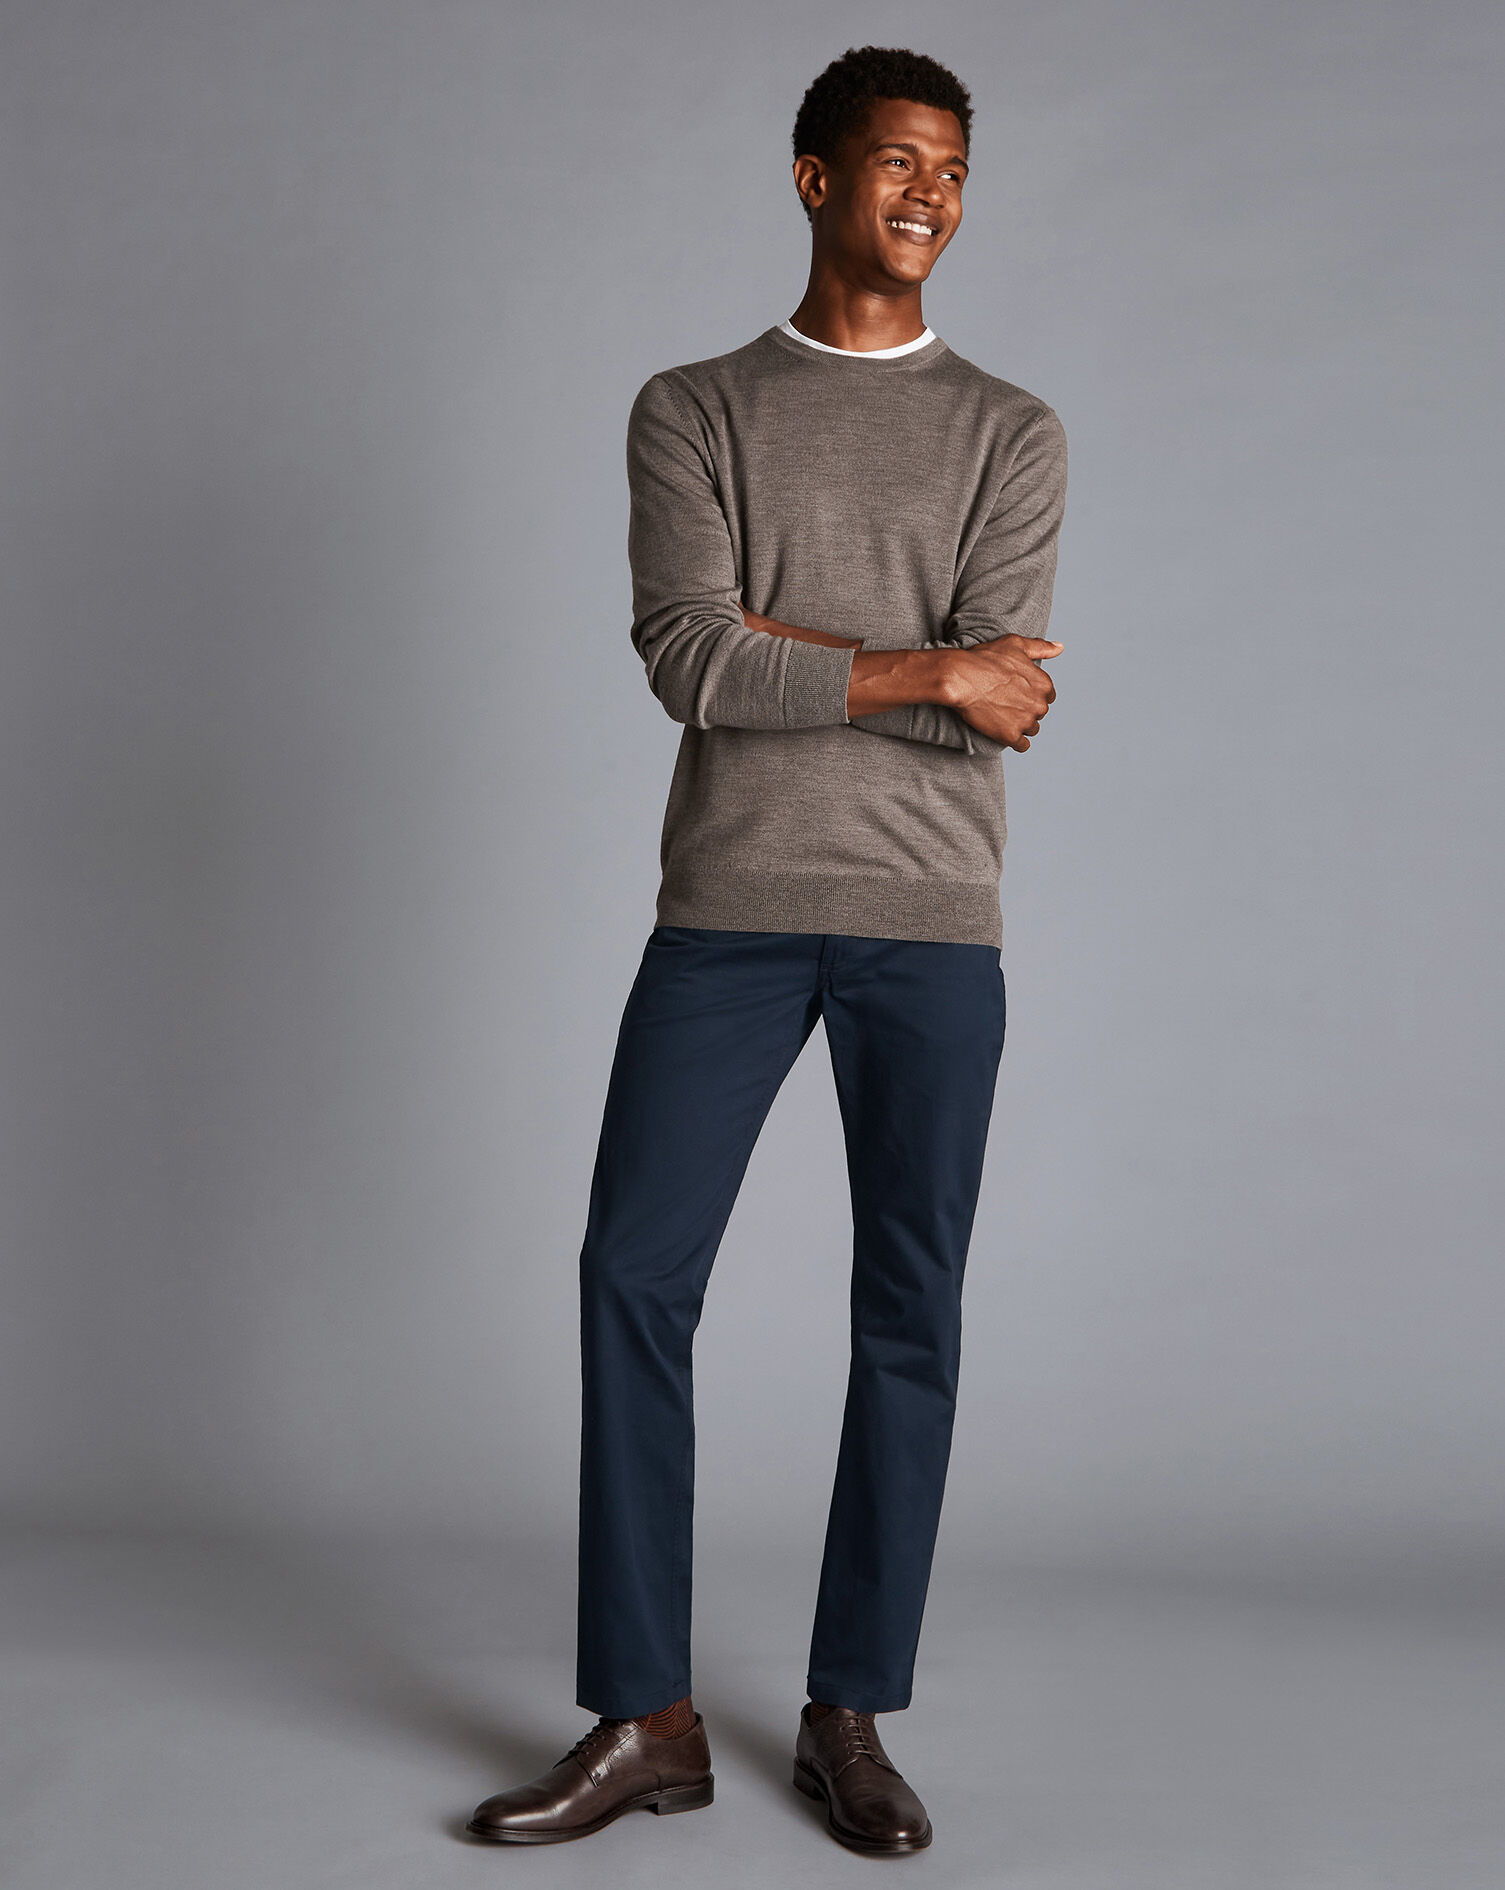 8 Modern Pant Styles All Men Should Own